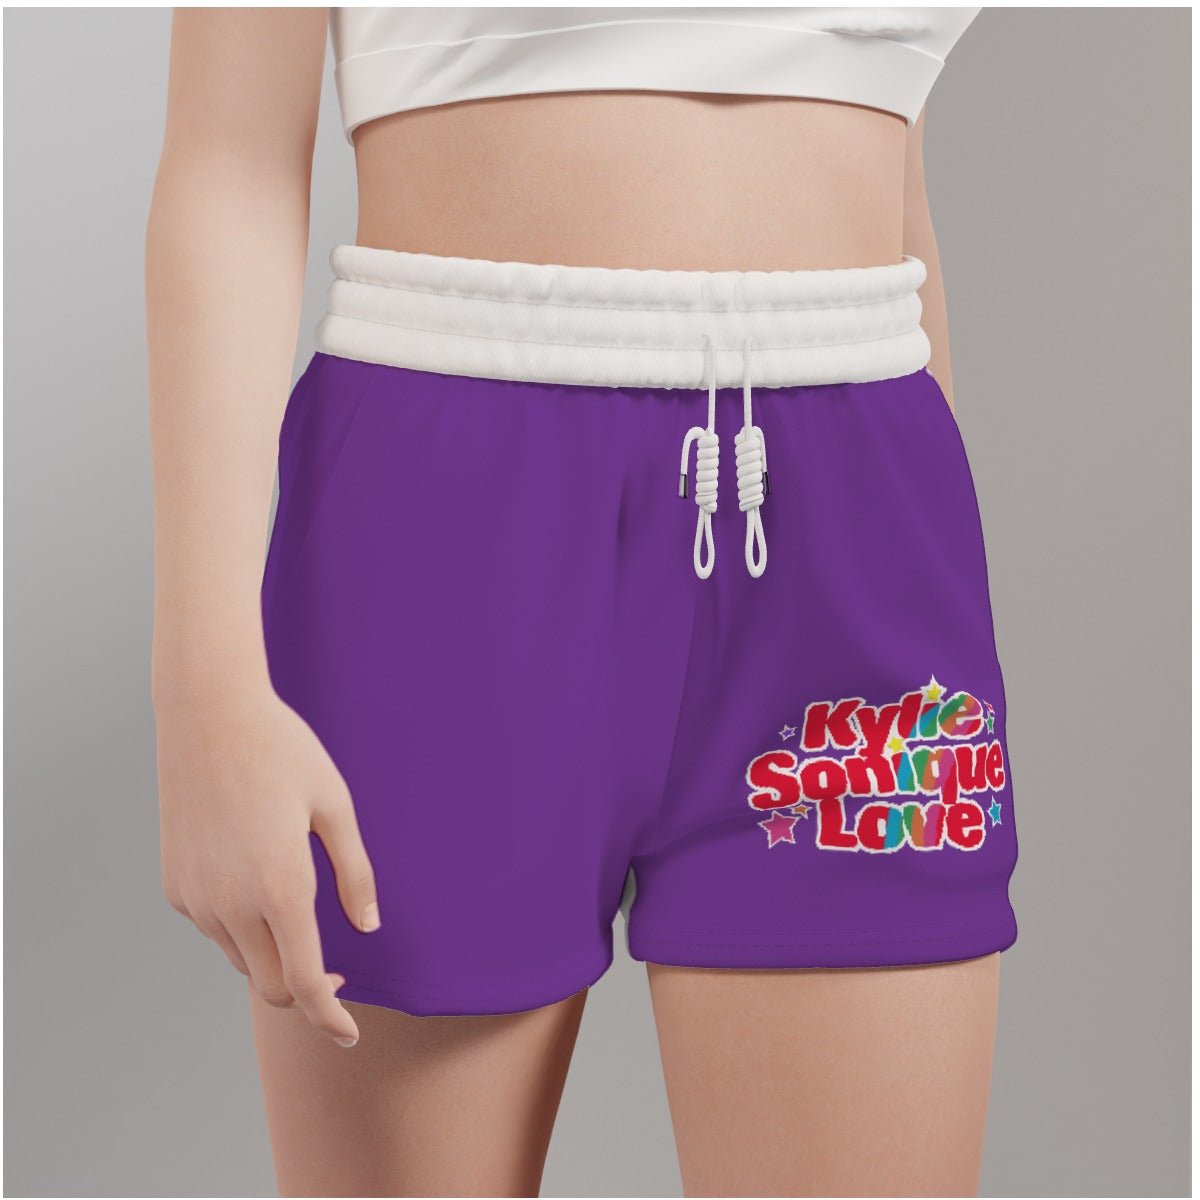 Kylie Sonique Love - Signature Logo Unisex Casual Shorts - dragqueenmerch